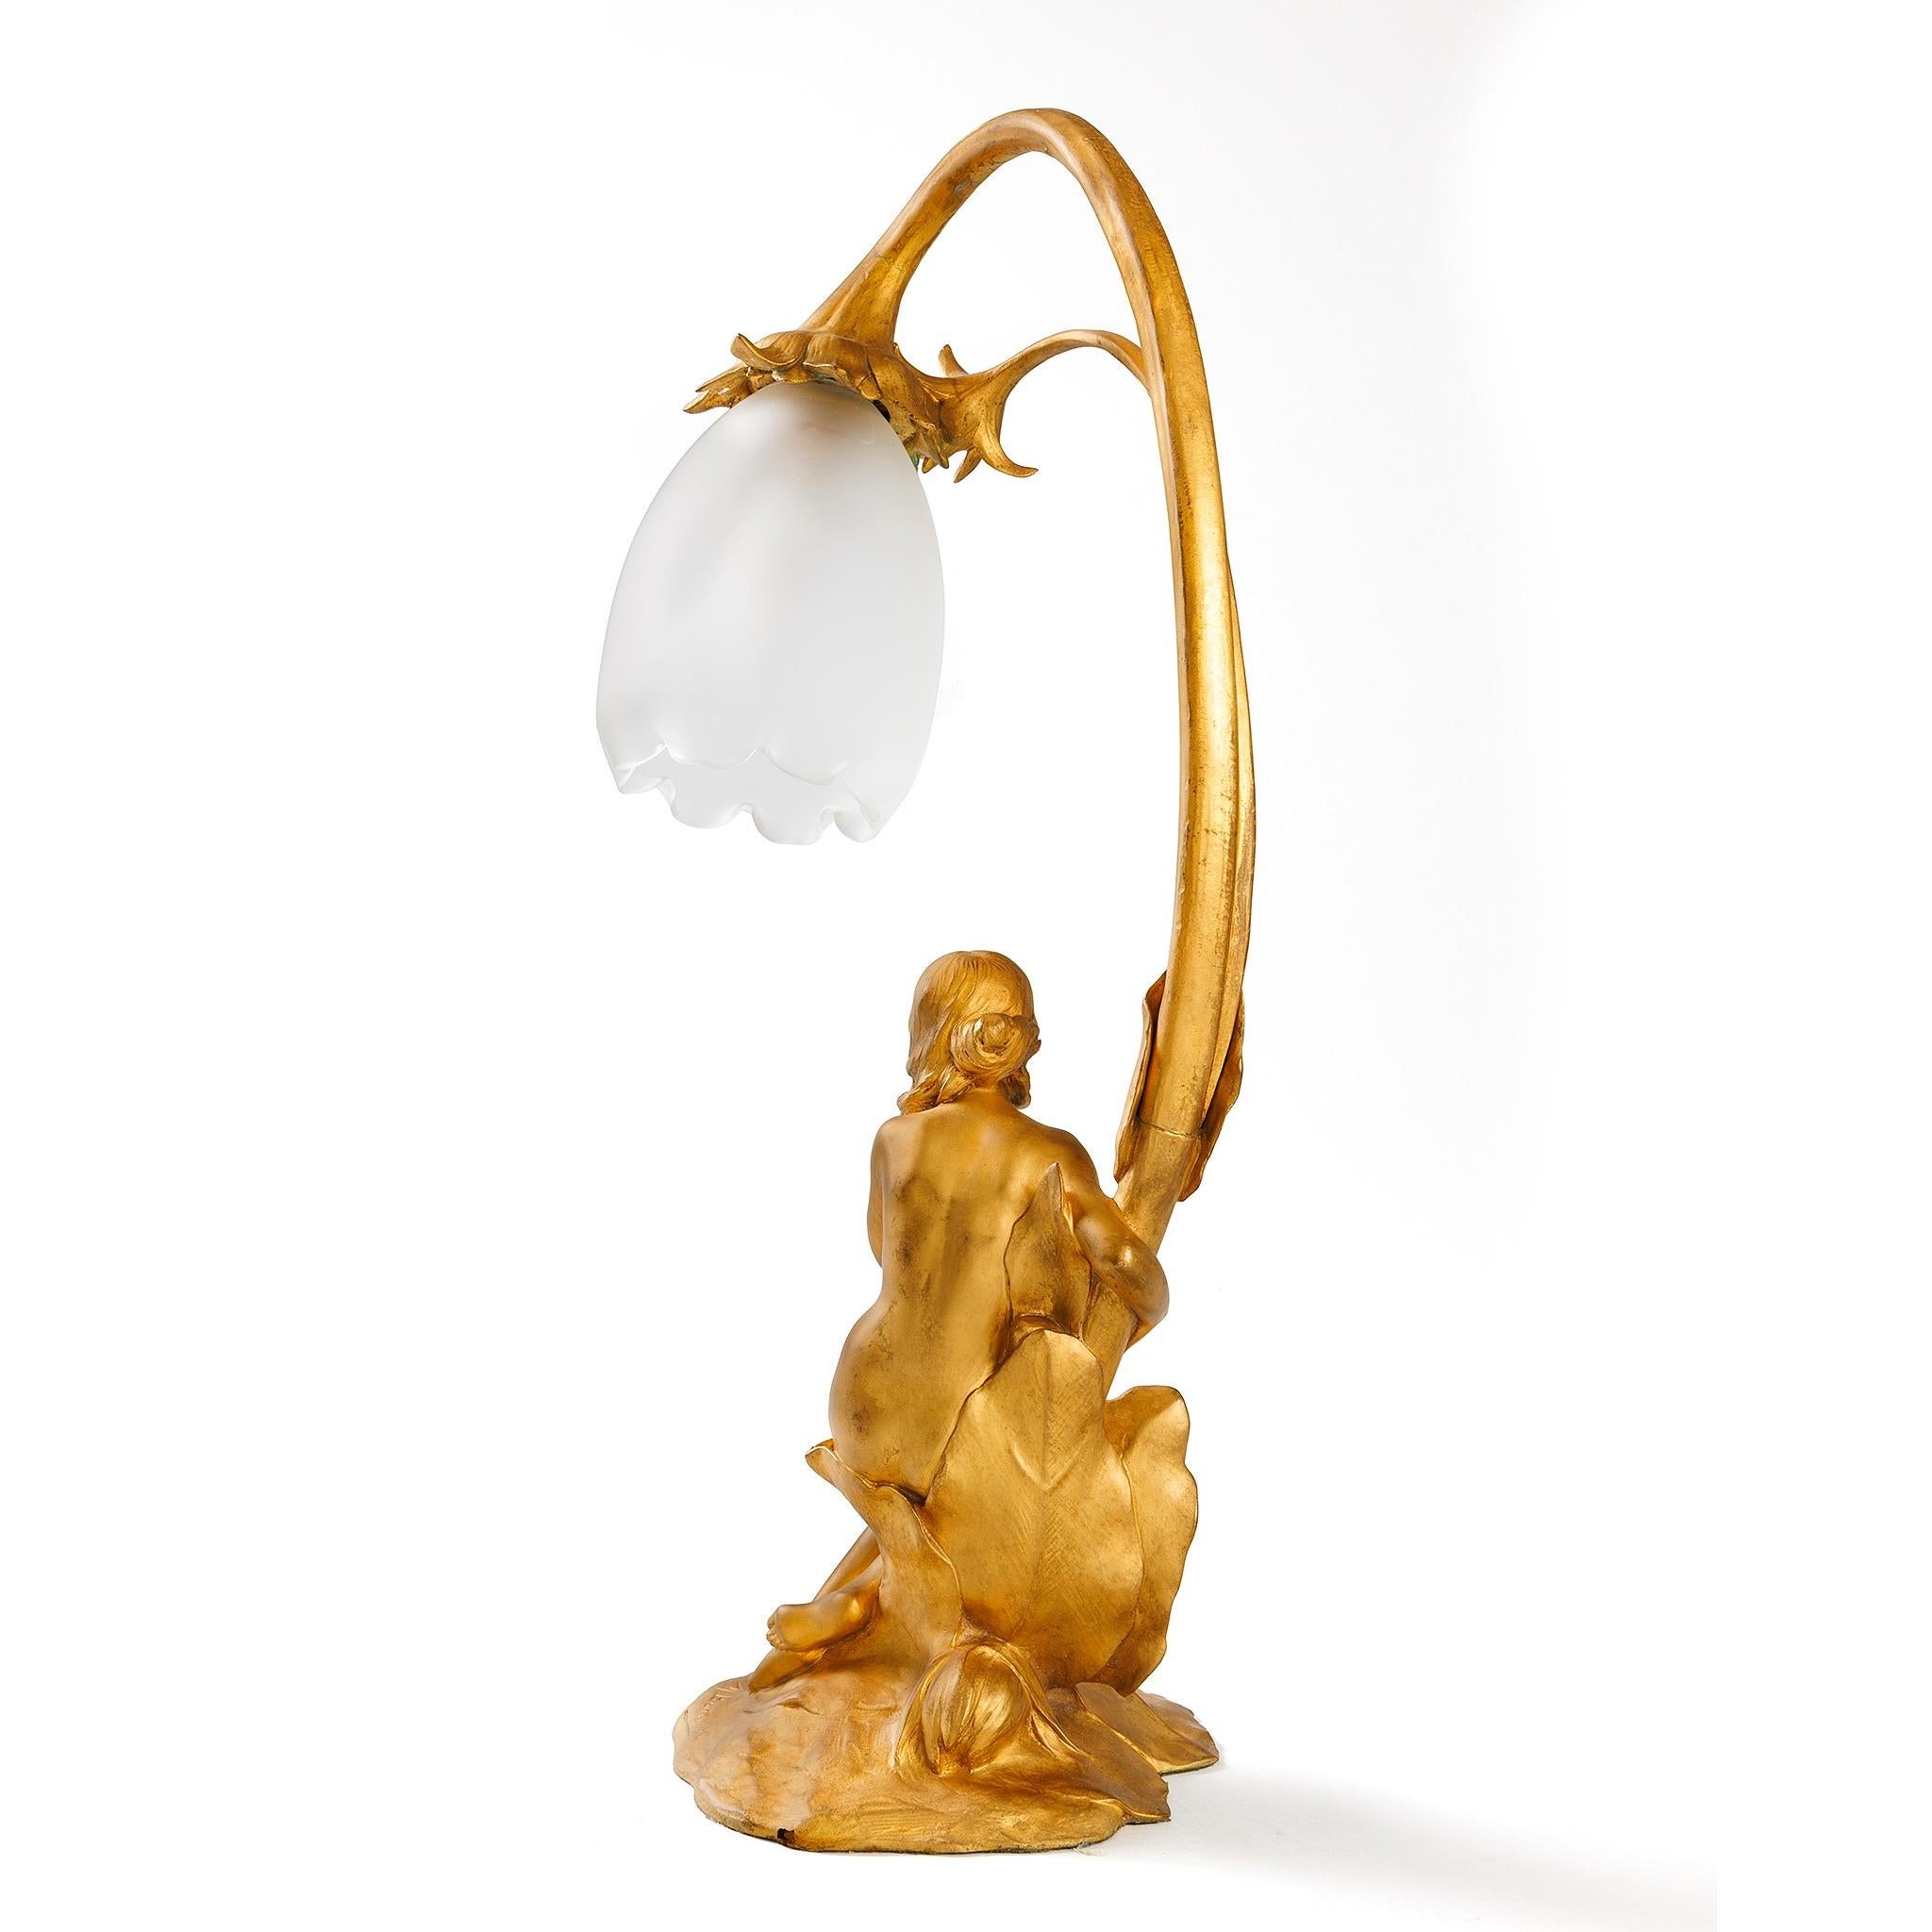 This exquisite table lamp by Maurice Bouval, known as 